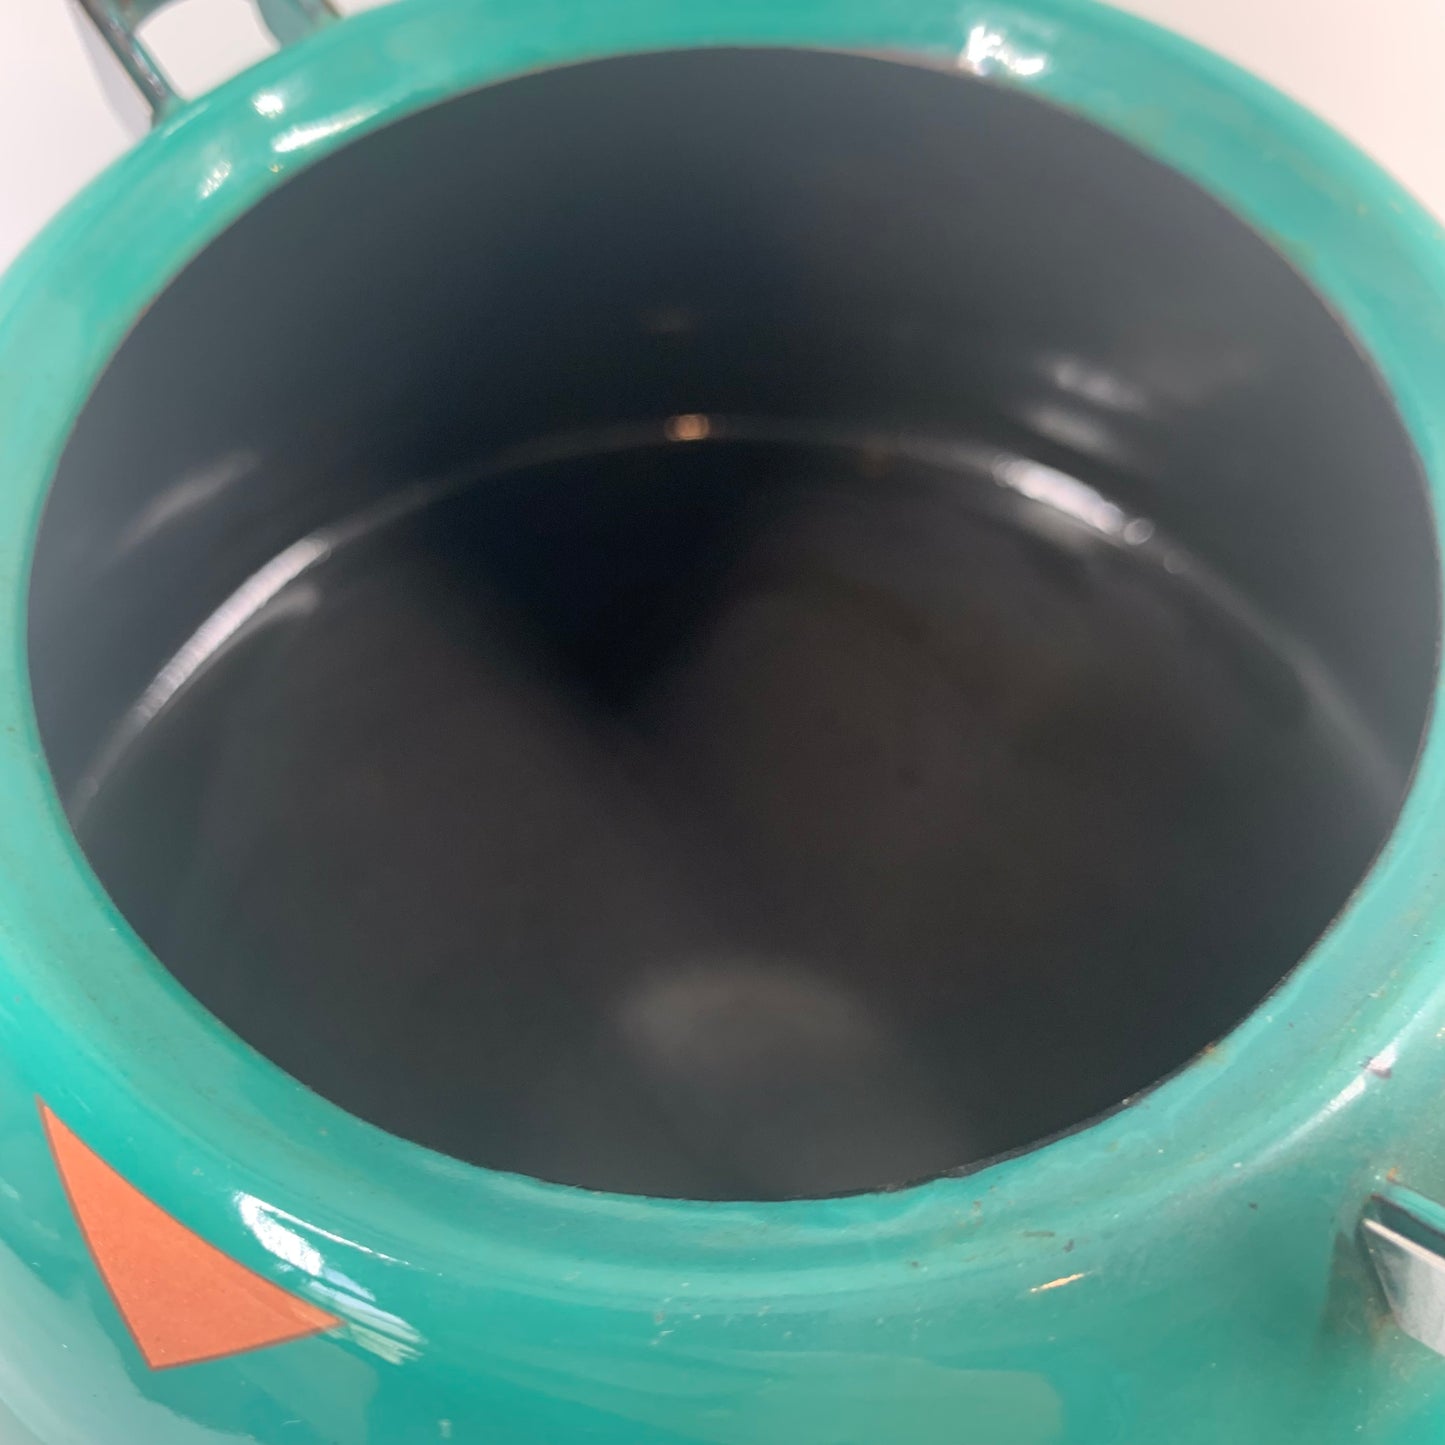 1980s French Memphis turquoise water kettle